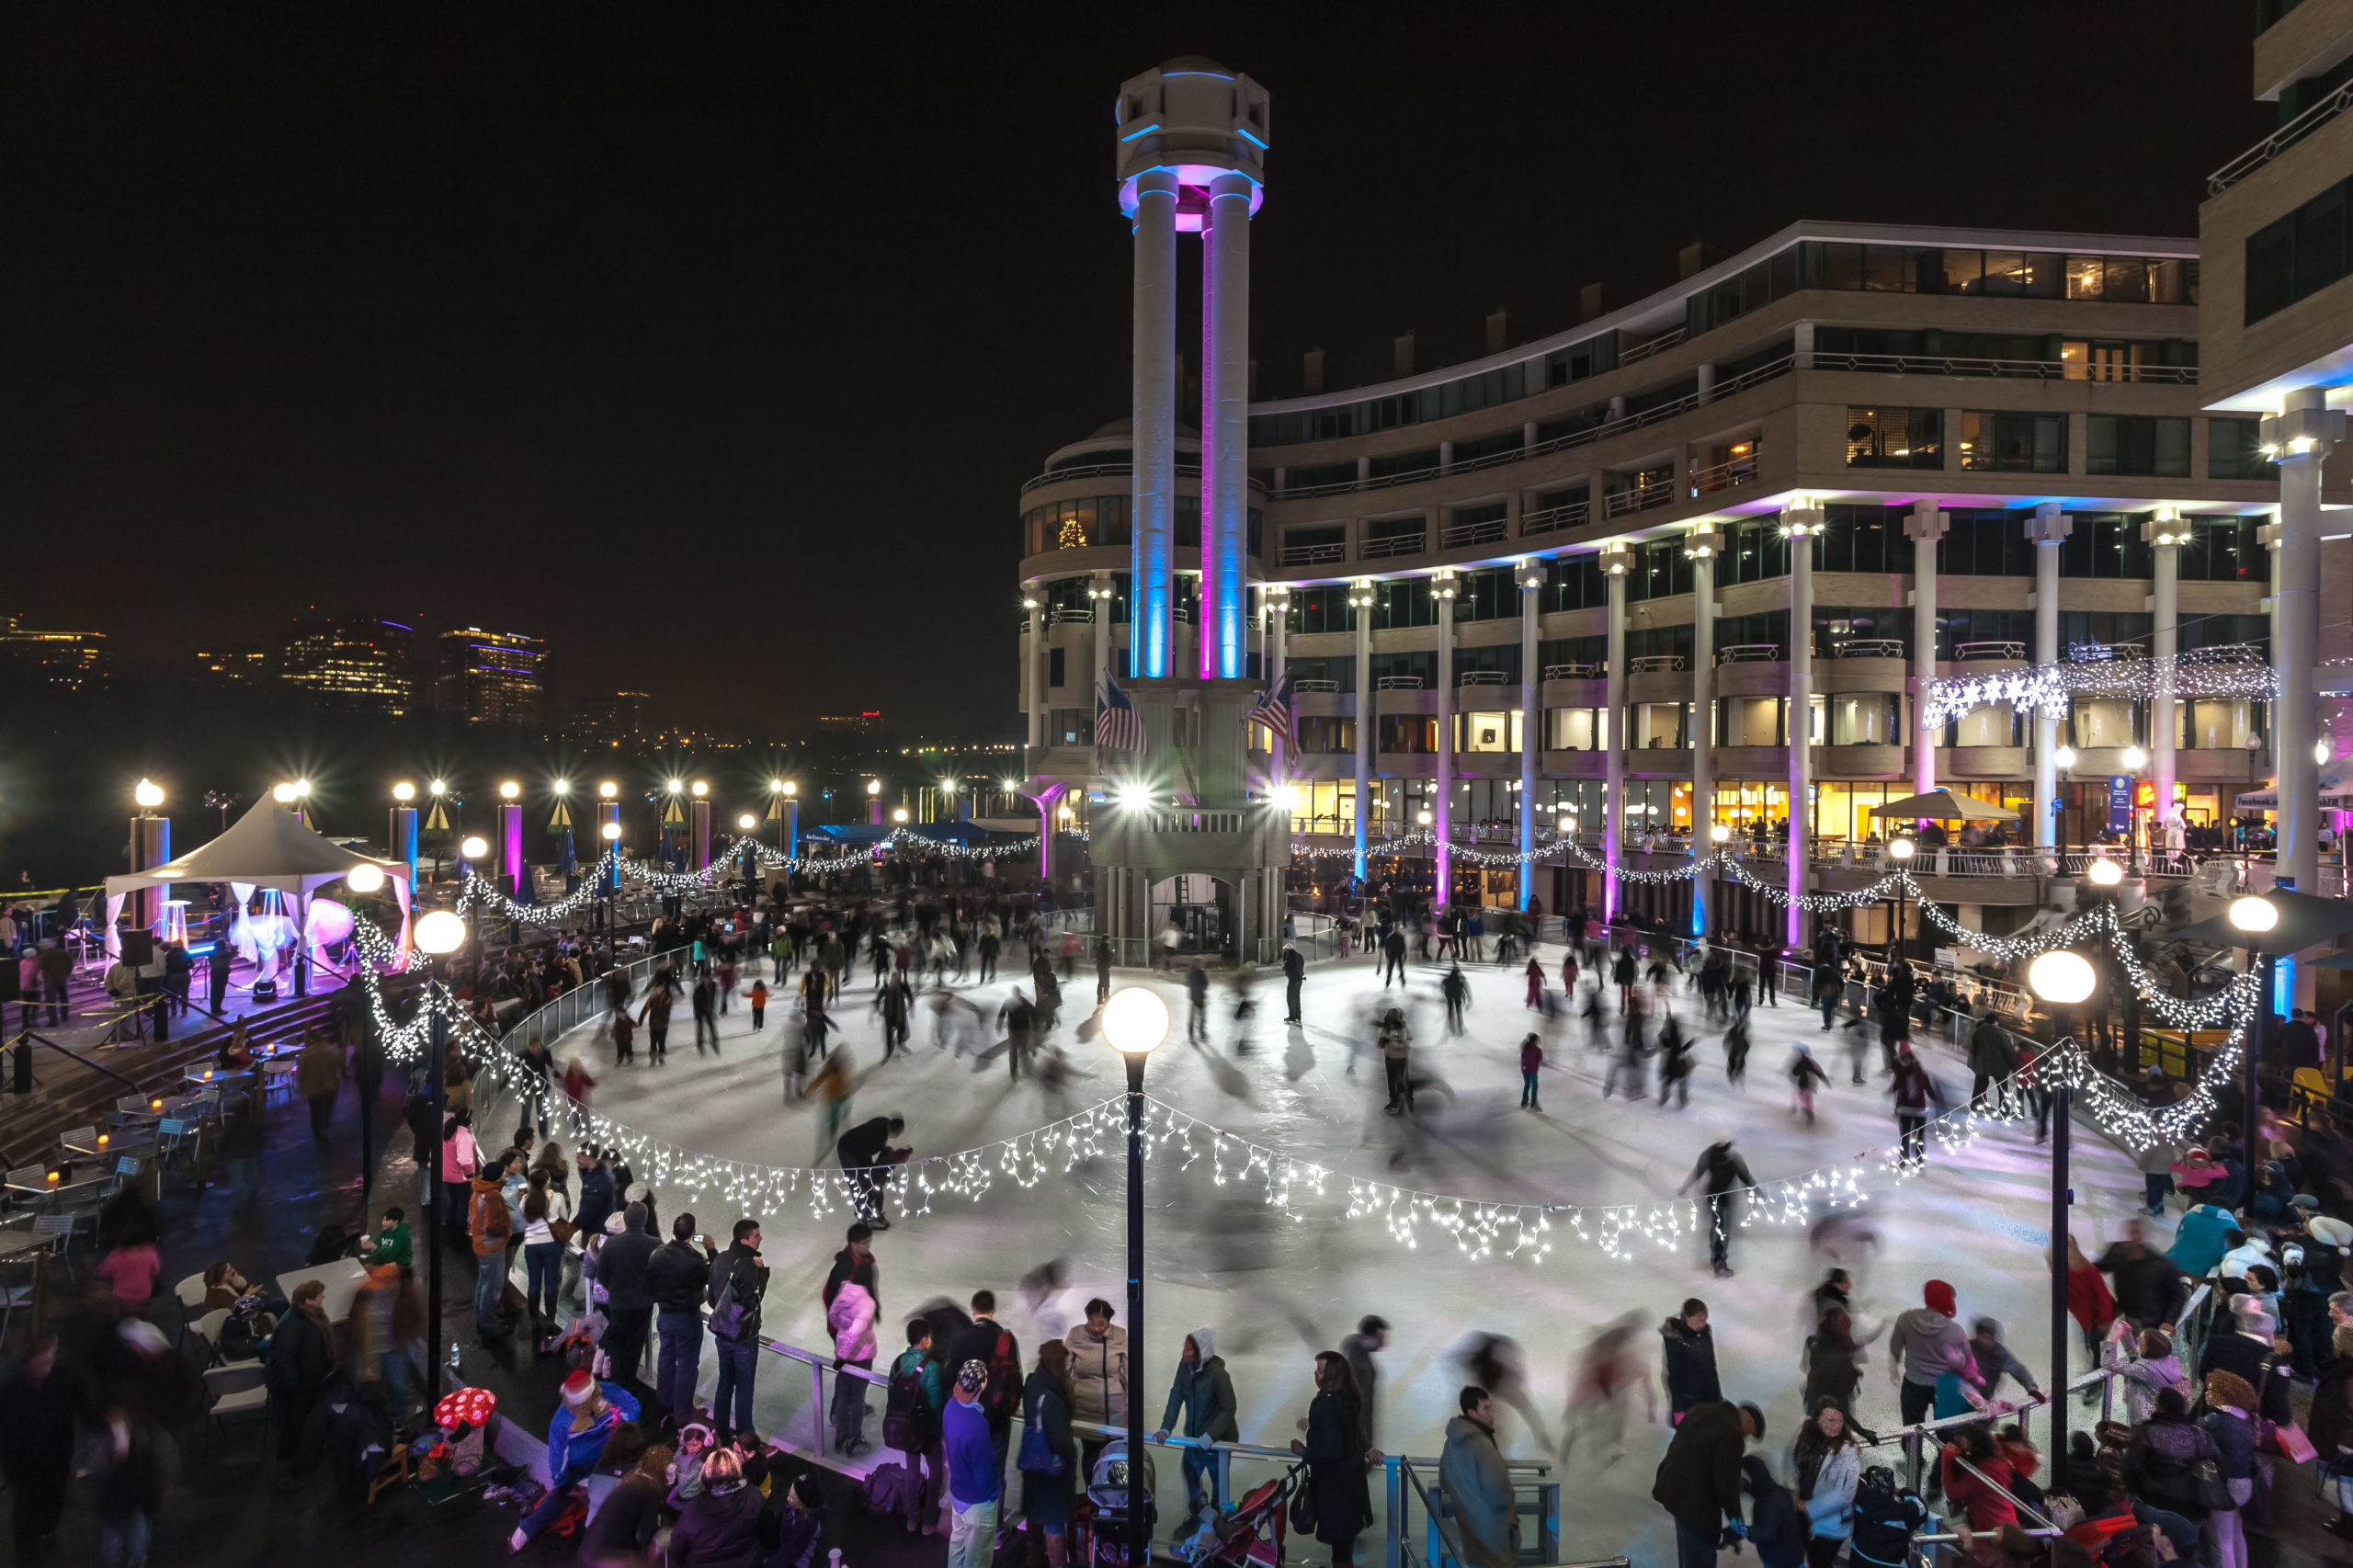 The Washington Harbour ice rink at night with lights